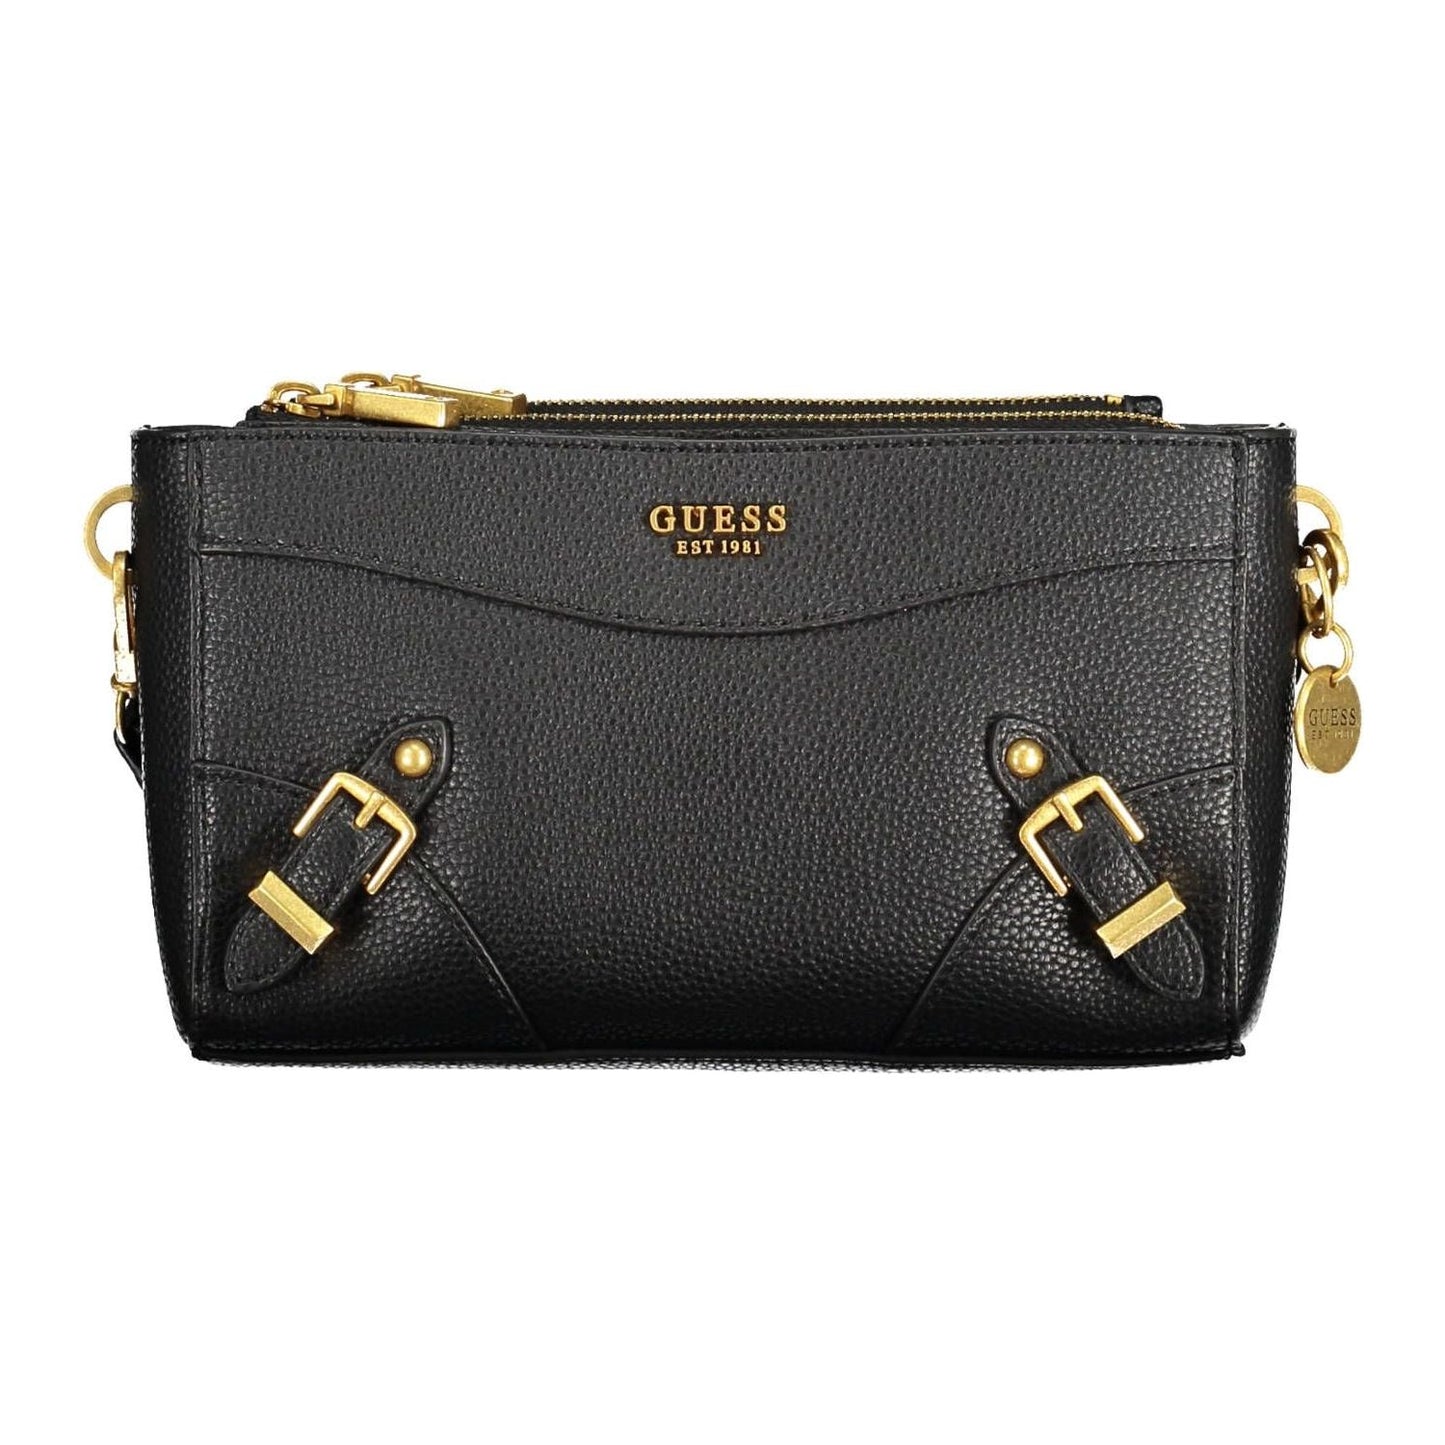 Guess Jeans Chic Contrasting Black Polyurethane Handbag chic-contrasting-black-polyurethane-handbag